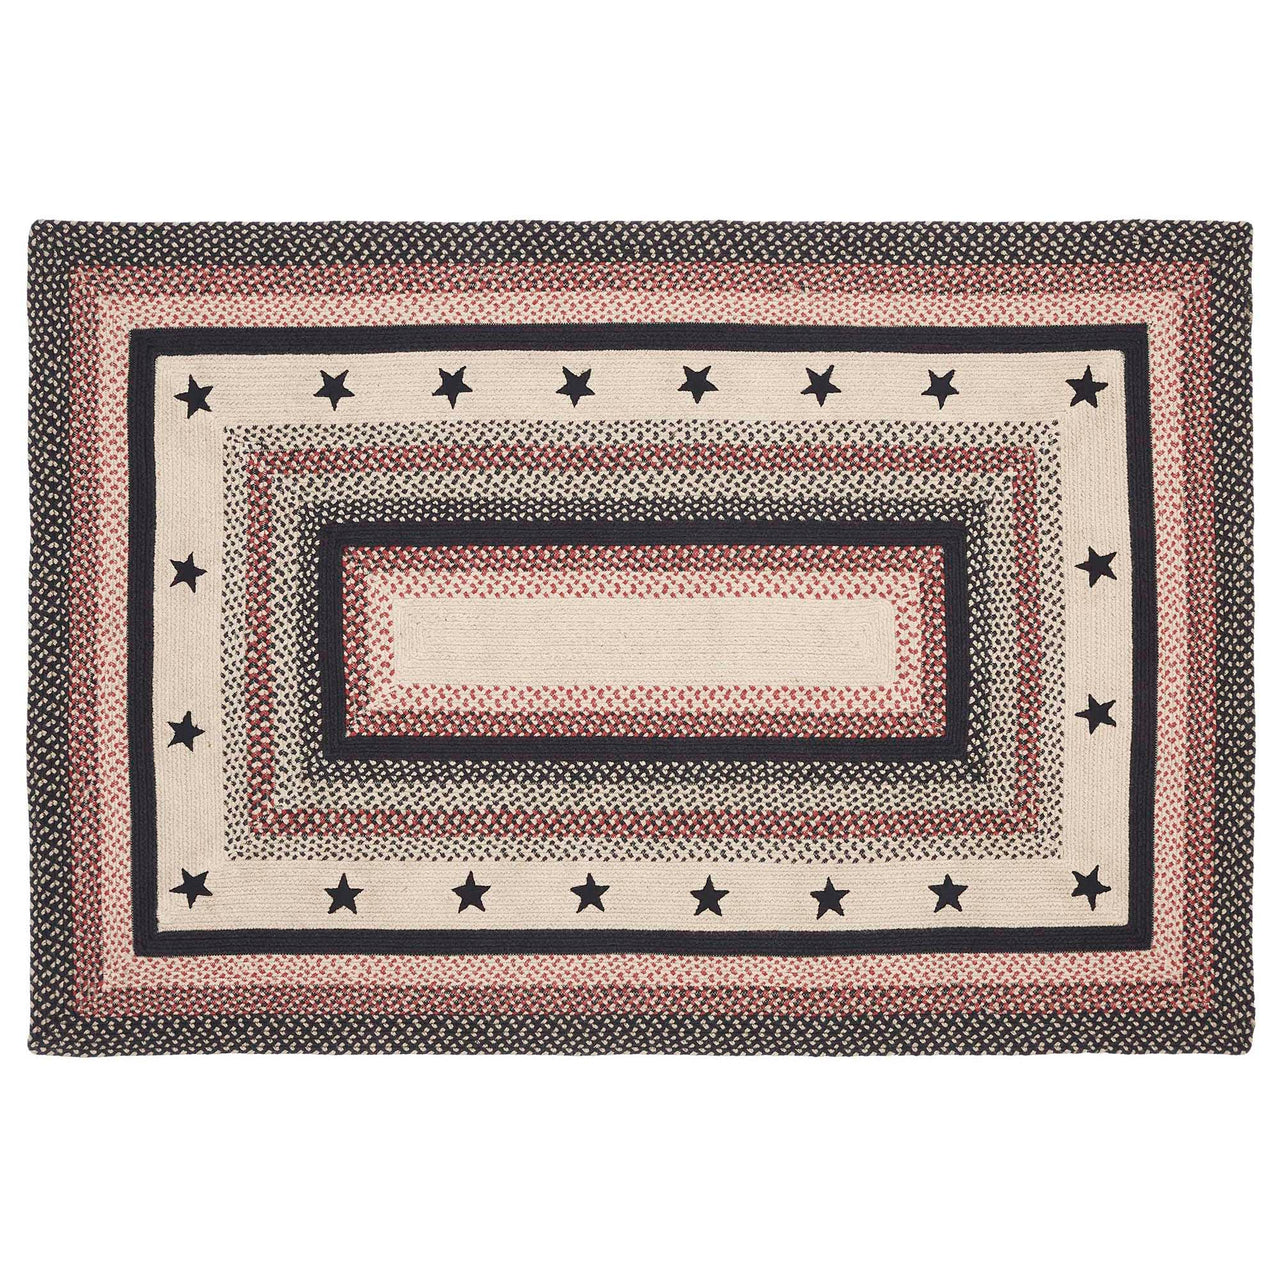 Colonial Star Jute Braided Rug Rect with Rug Pad 4'x6' VHC Brands